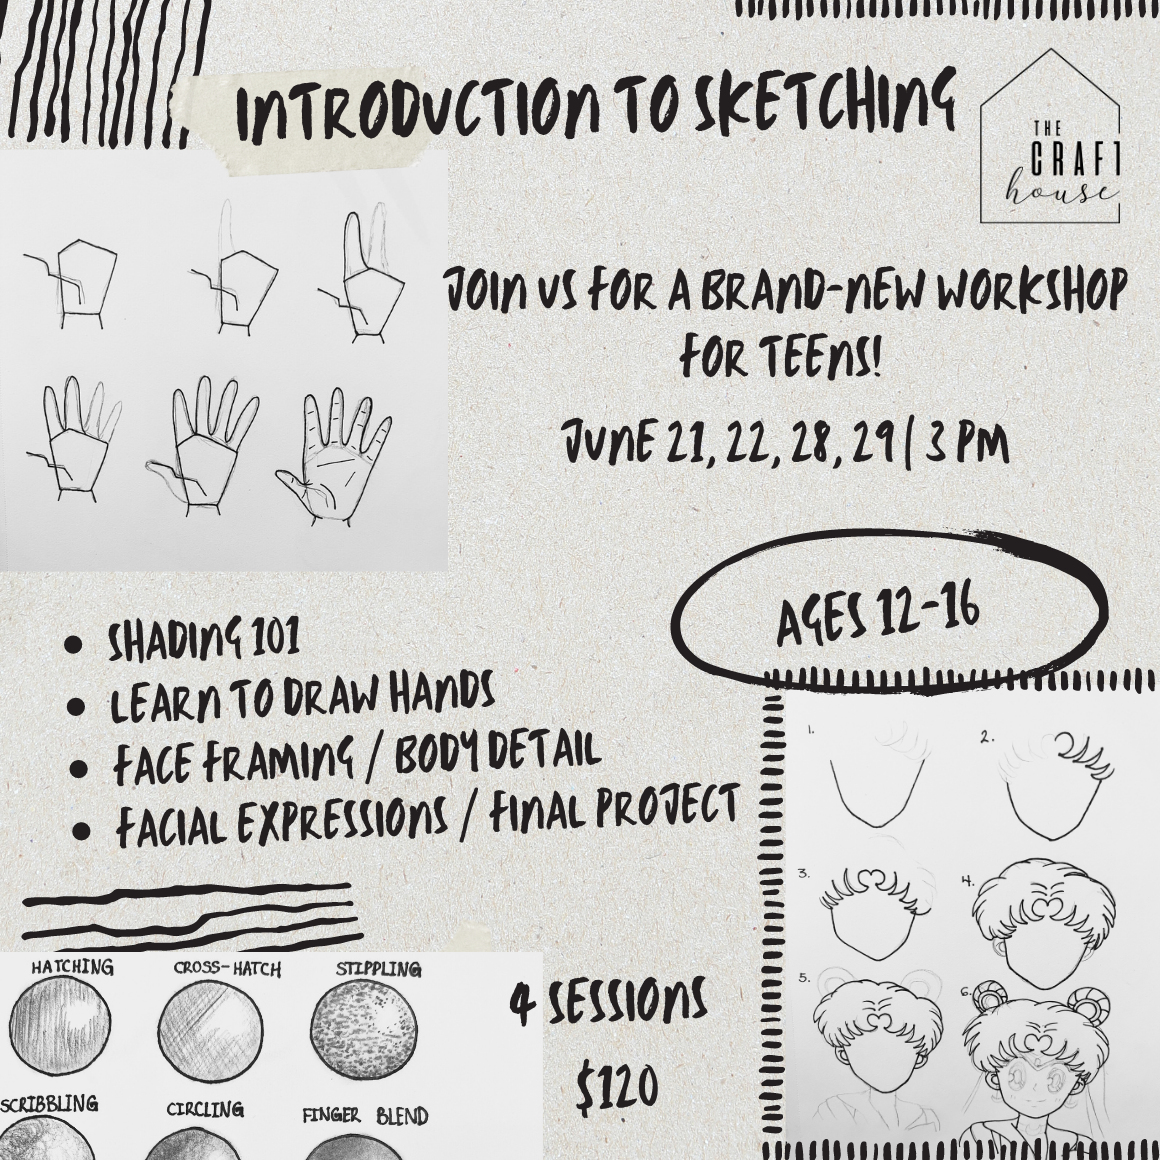 introduction to sketching (1160 × 1160 px)